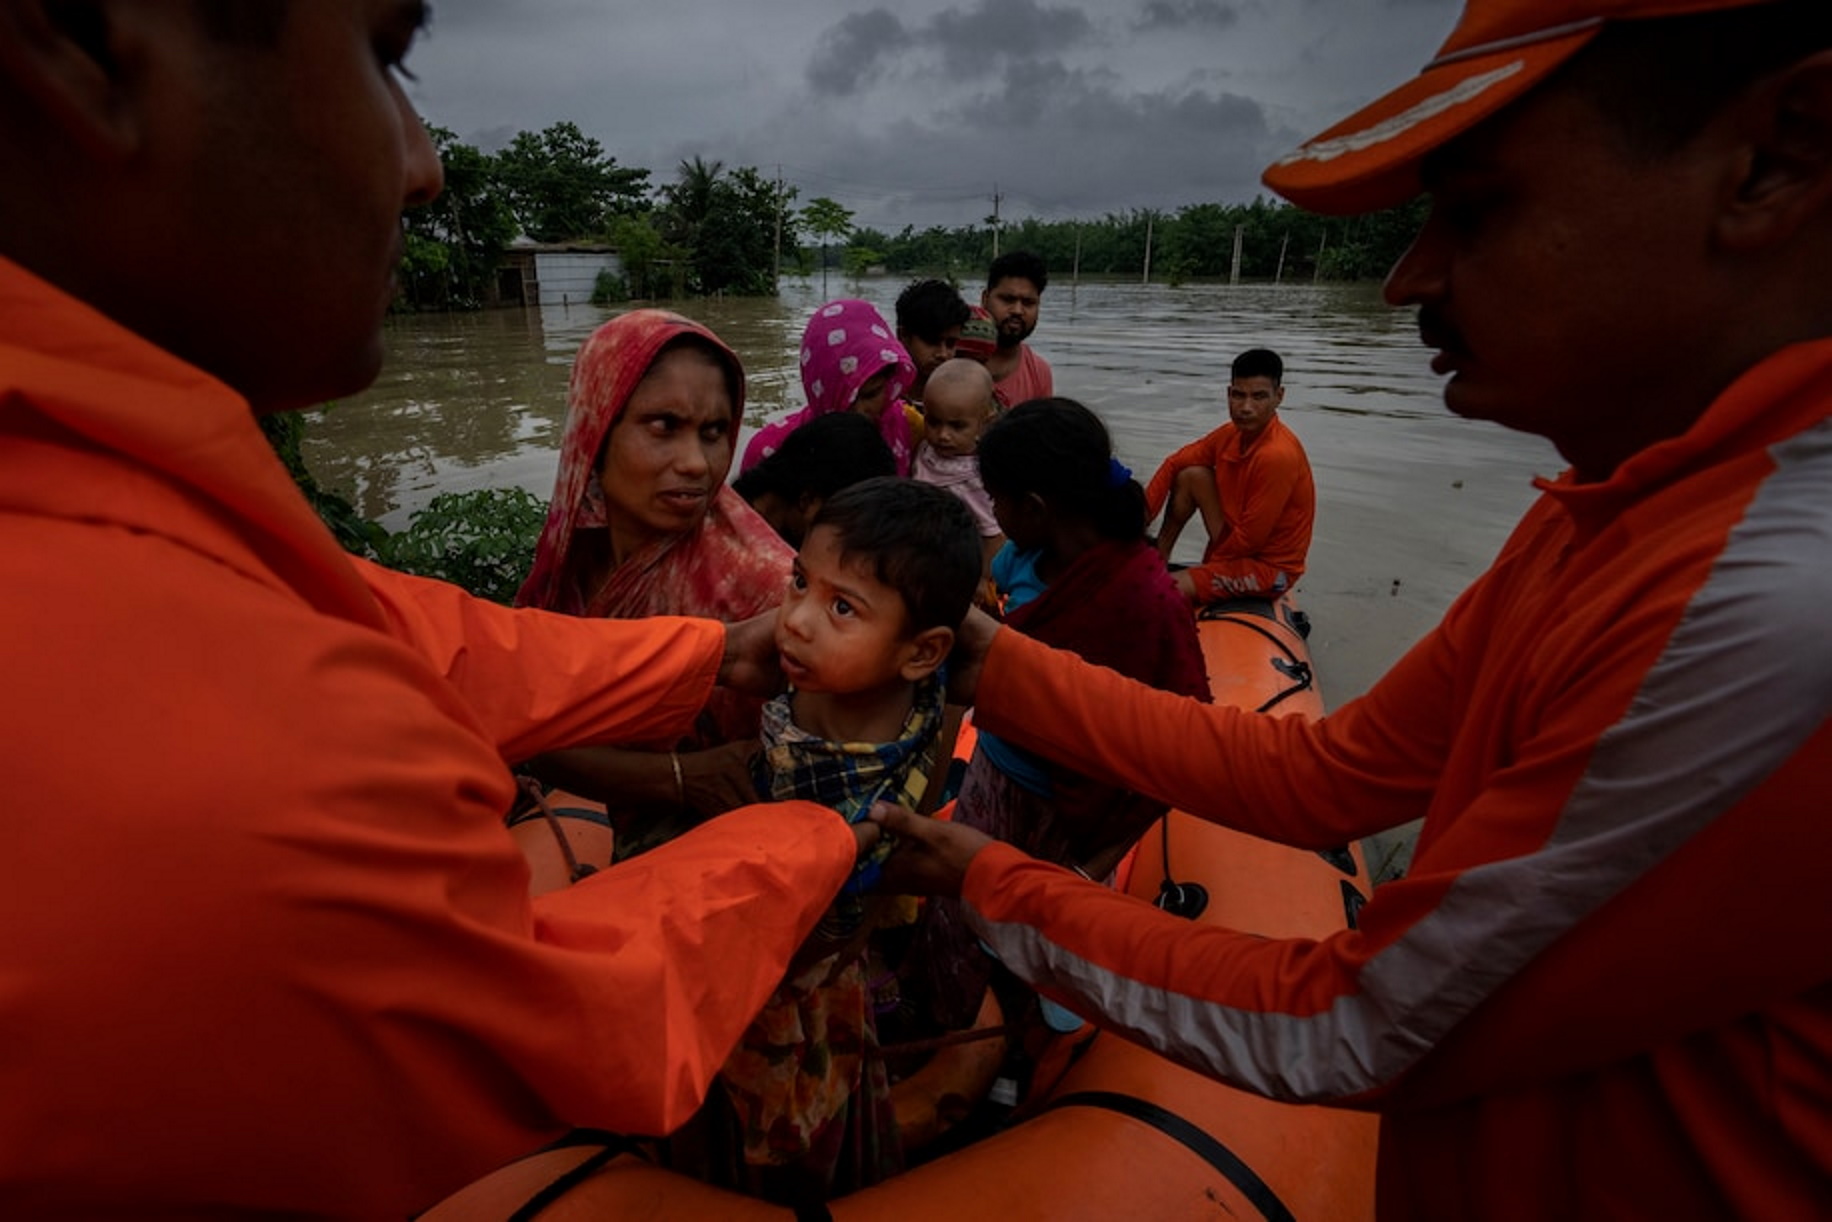 National Disaster Response Force (NDRF) personnel rescue flood-affected people in Korora village, west of Gauhati, India, Friday, 17 June 2022. Photo: Anupam Nath / AP